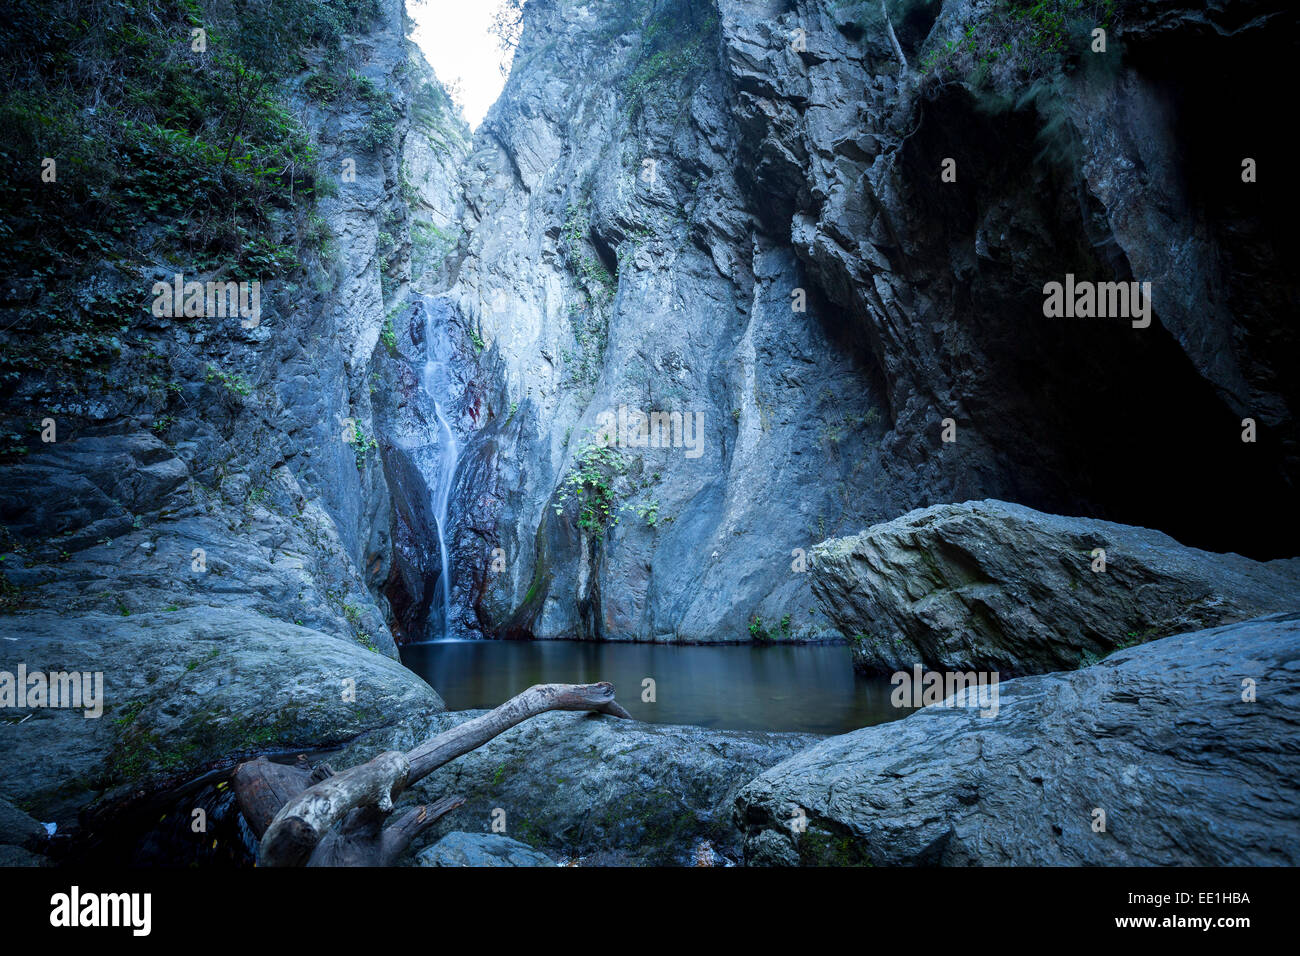 The Cascades, Ceret, Vallespir region, Pyrenees, France, Europe Stock Photo